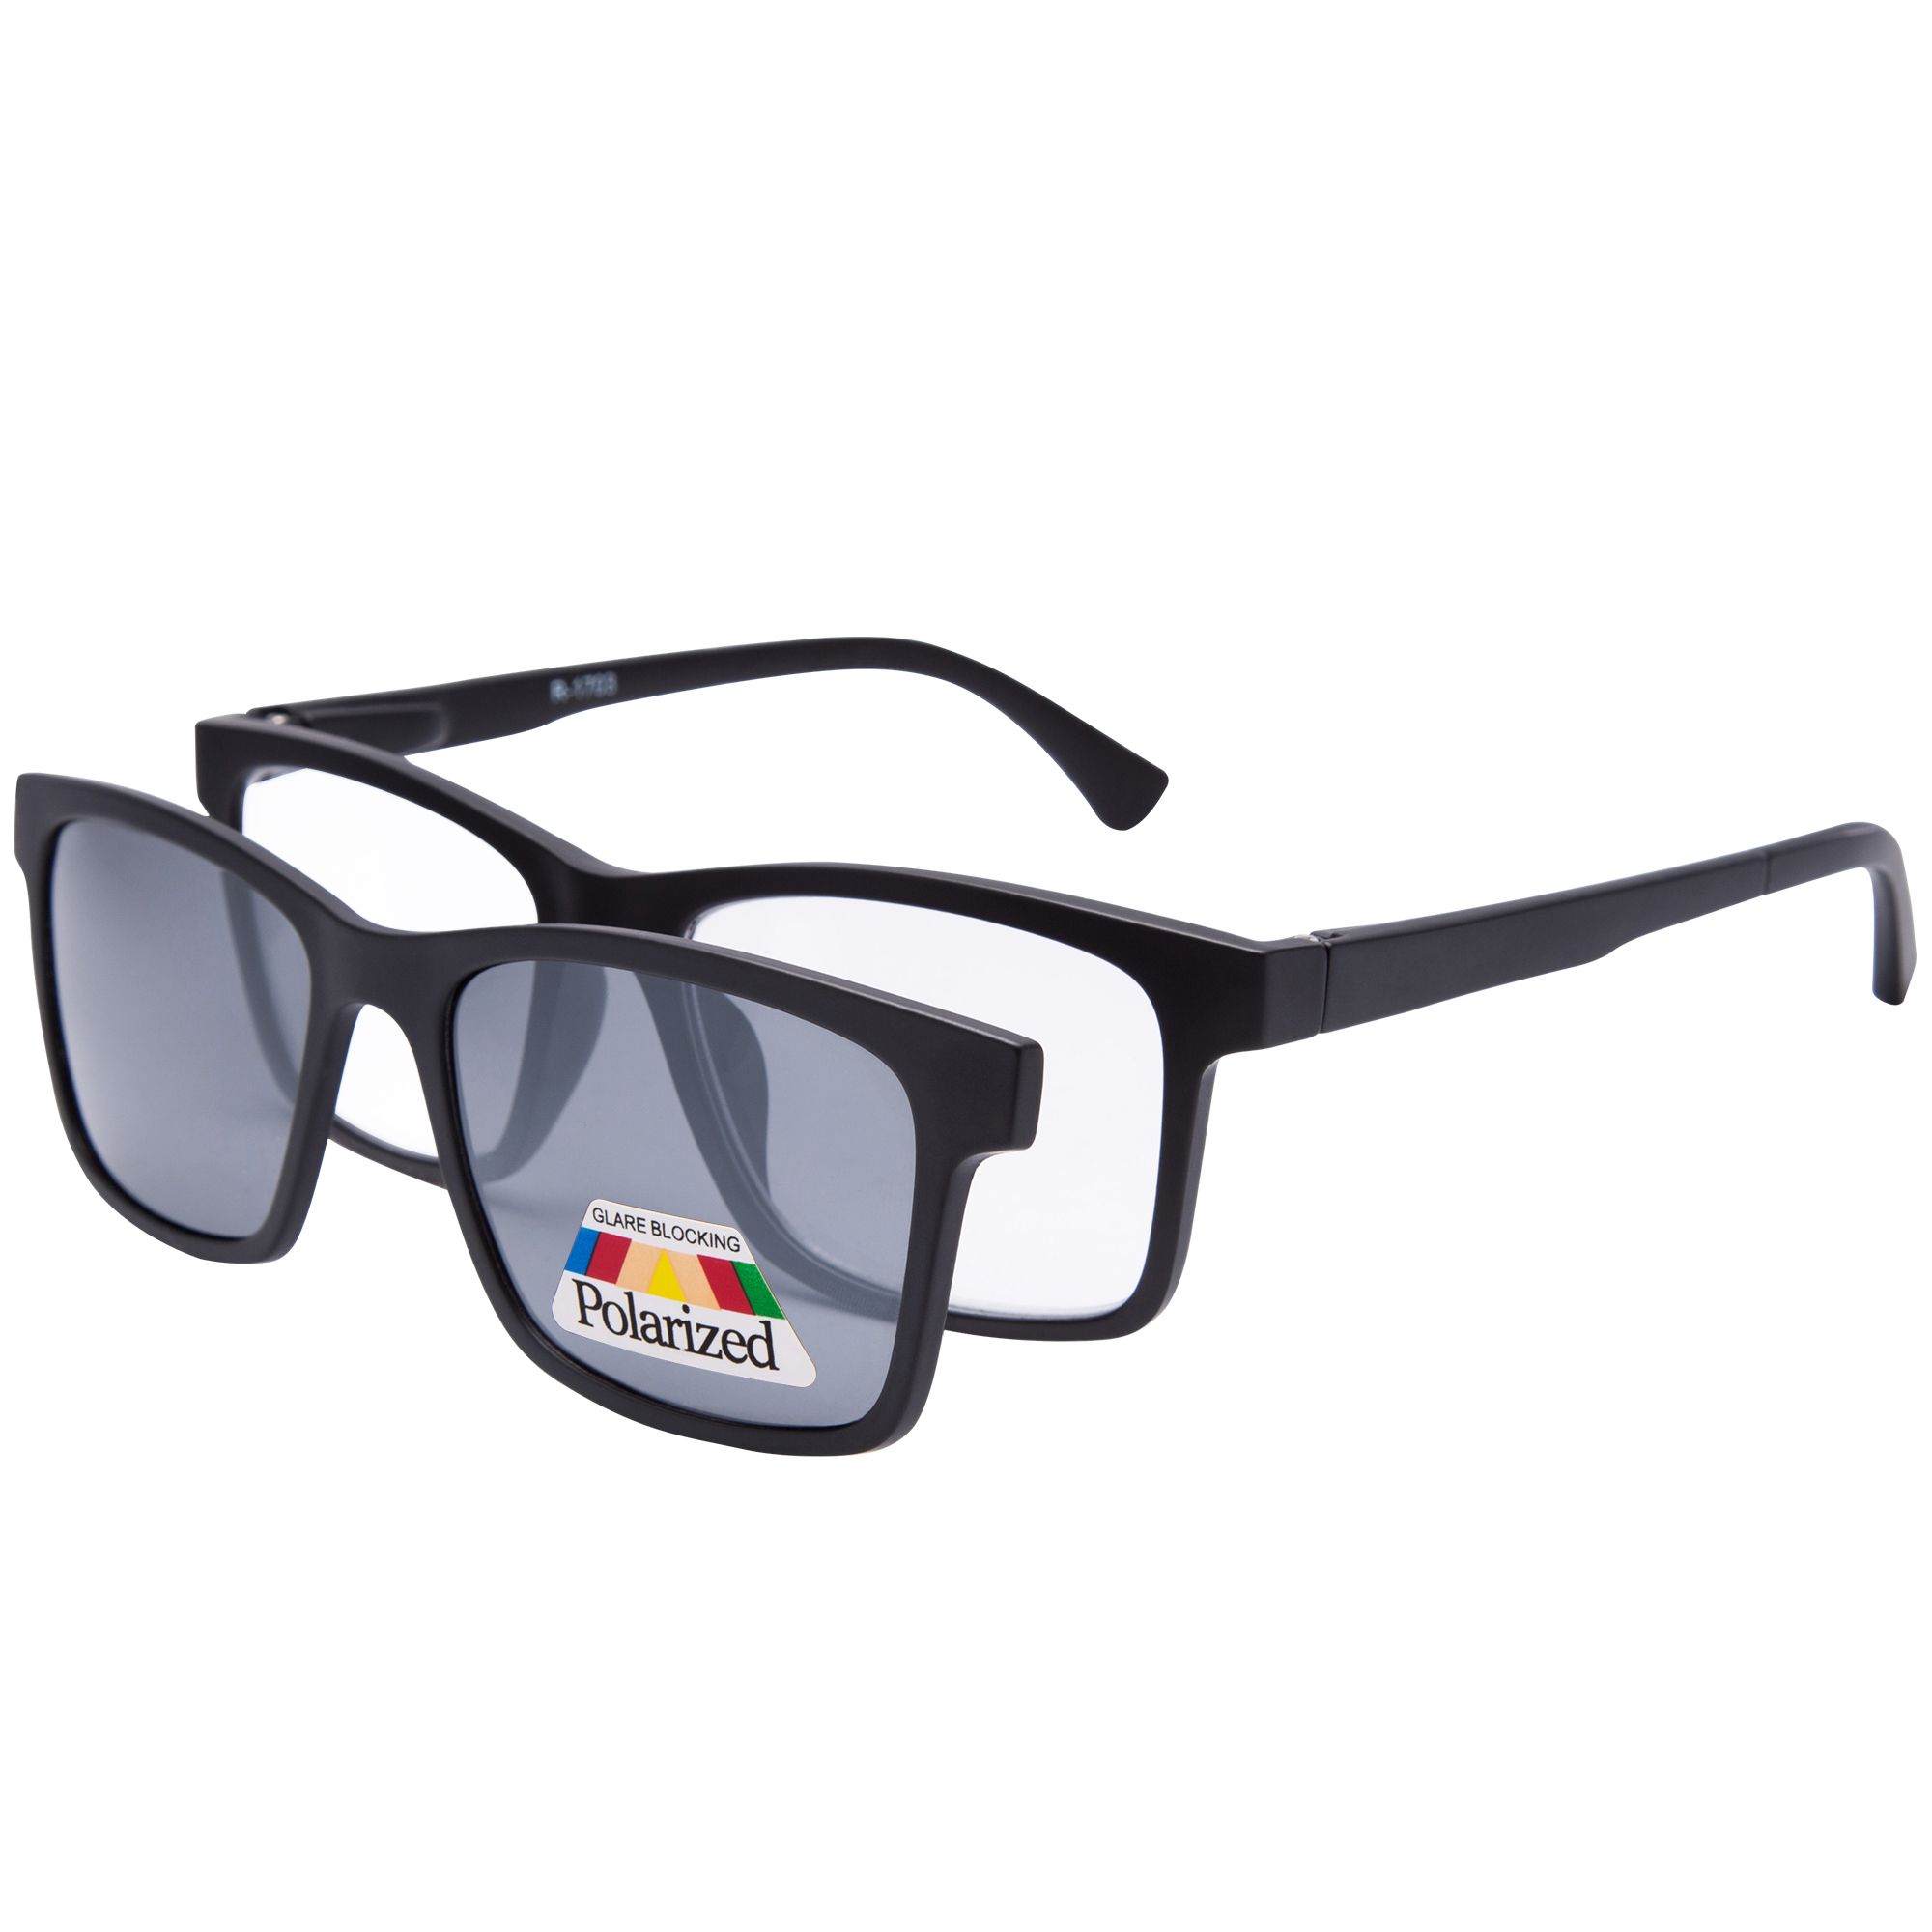 reading glasses polarized magnetic clip on